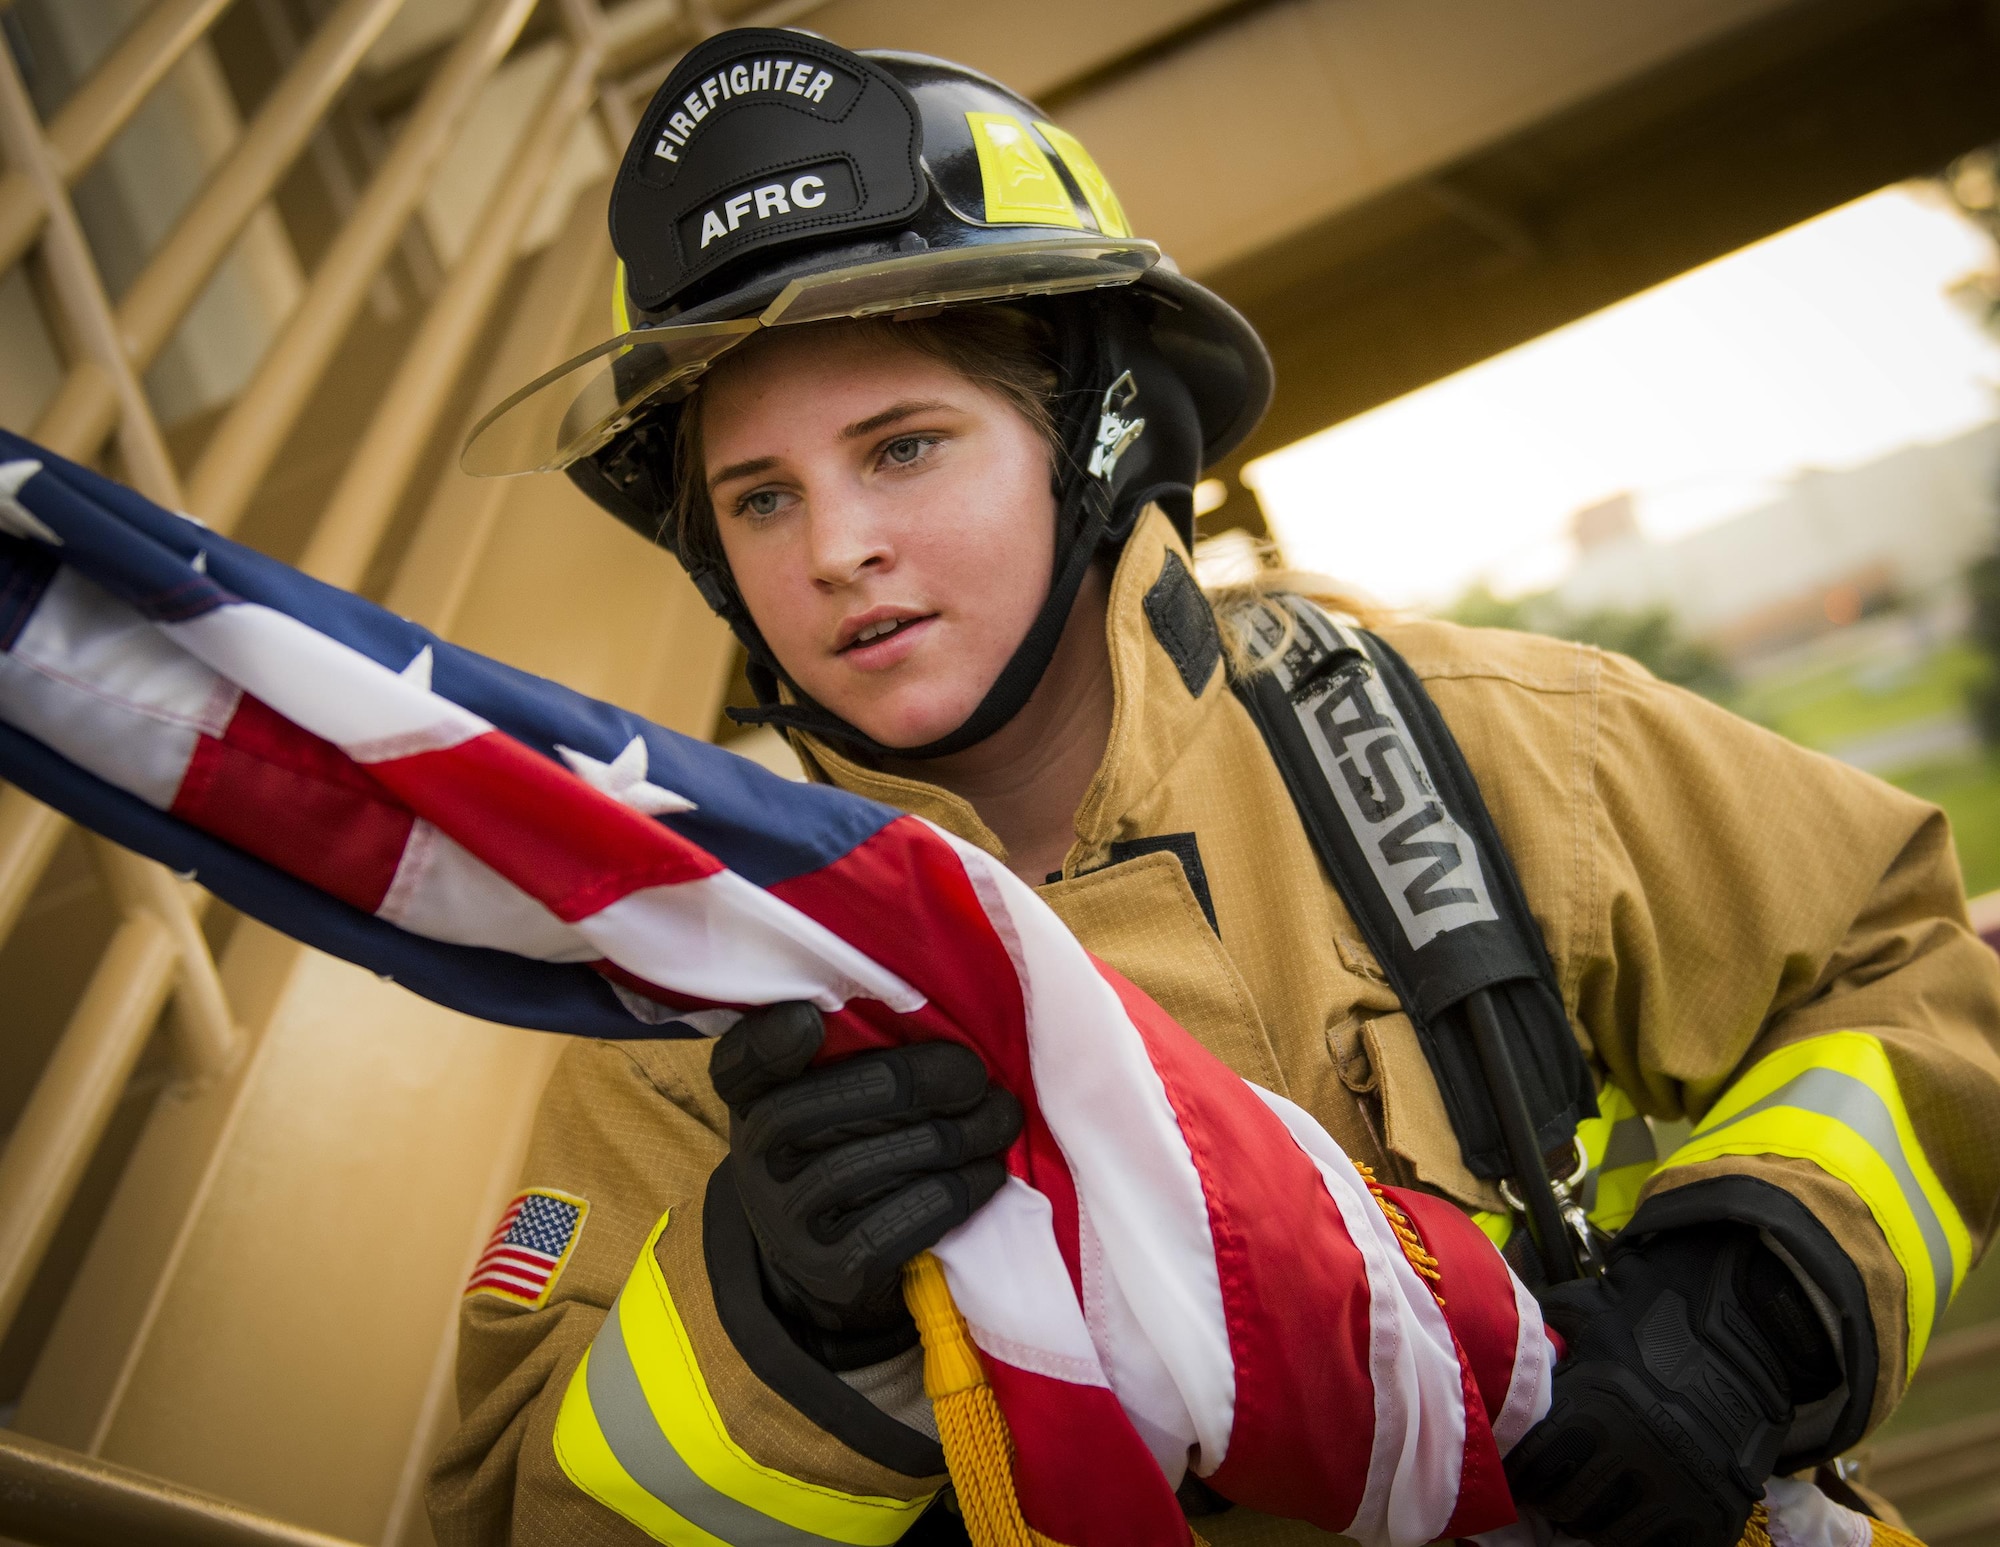 Senior Airman Raquelle Lockaby, 919th Special Operations Civil Engineer Squadron, carries an American flag up a flight of stairs while wearing her firefighting gear during a 9/11 Memorial Stair Climb event at Duke Field, Fla., Sept. 11.  The 24-hour climb began at 8:46 a.m. Sept. 10 with the 919th Special Operations Wing commander walking the flag up the outside stairwell of the base’s billeting facility.  Wing Airmen took turns walking the flag up and down the stairwell the entire day until it was delivered to a firefighter and security forces color guard at 8:46 a.m. the next morning for a 9/11 Remembrance ceremony. More than 115 Airmen carried the flag throughout the day and night for a total of more than 207,000 steps.  (U.S. Air Force photo/Tech. Sgt. Sam King)